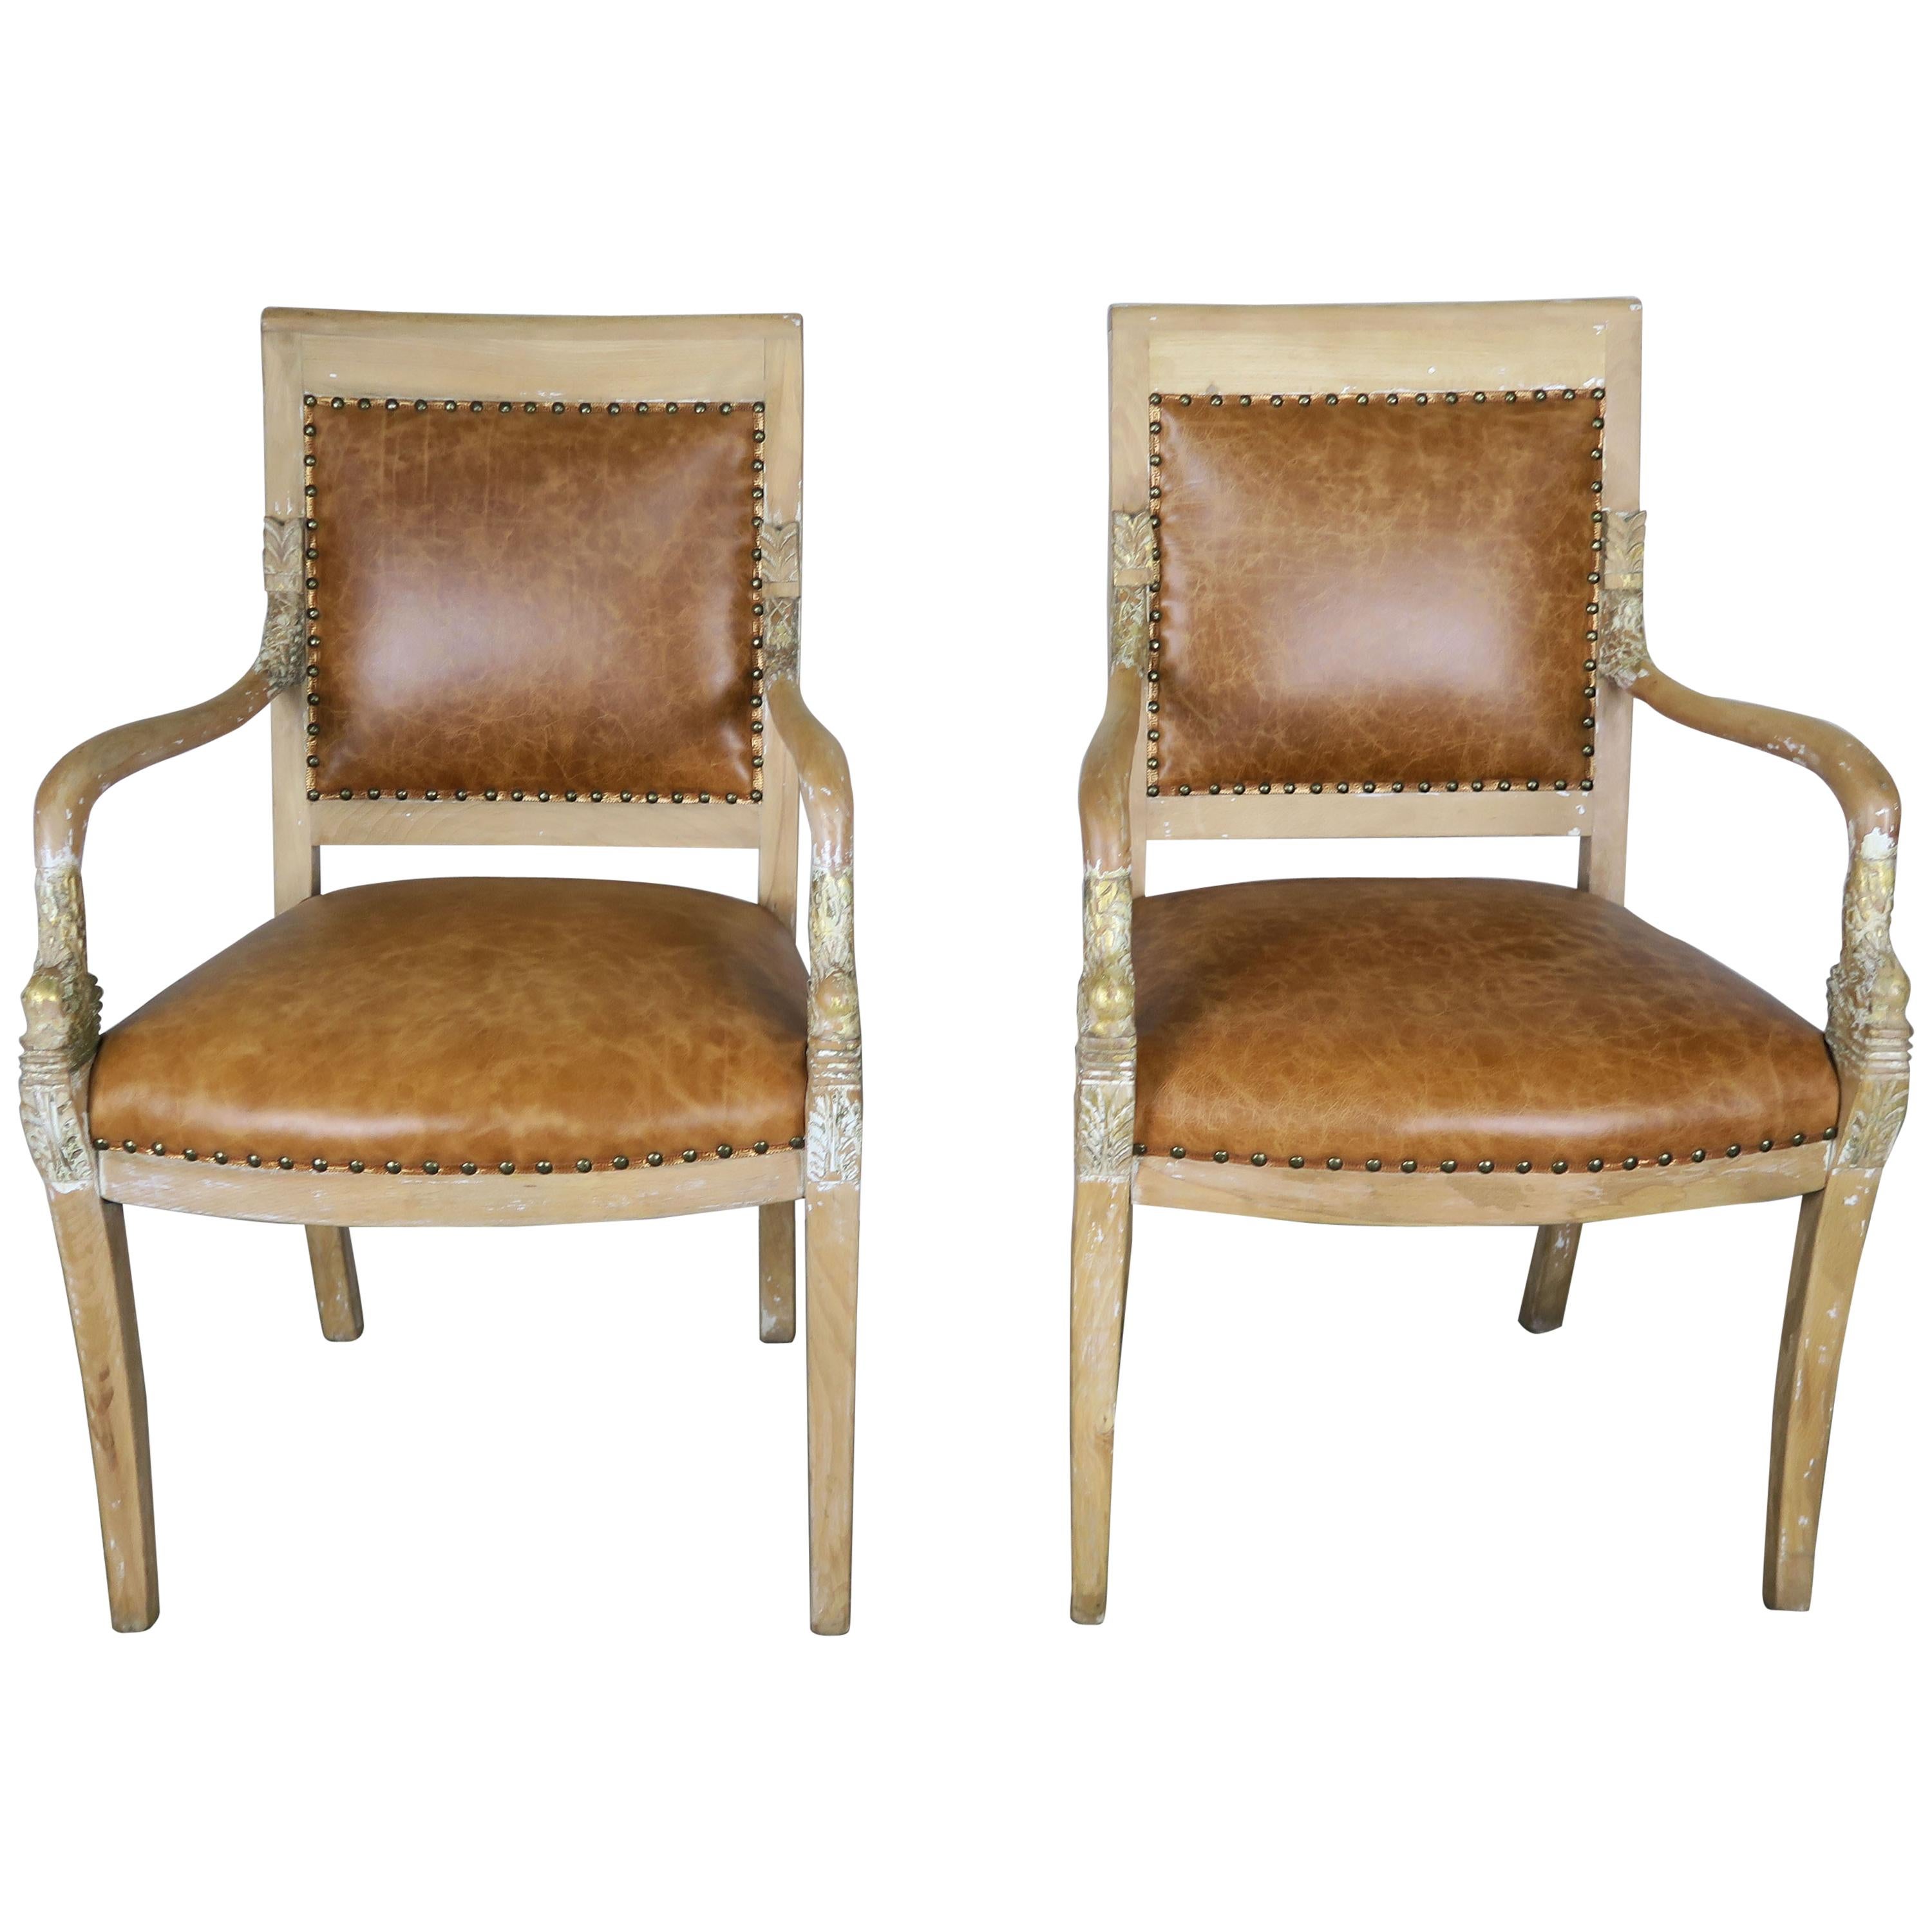 Pair of Italian Dolphin Leather Upholstered Armchairs